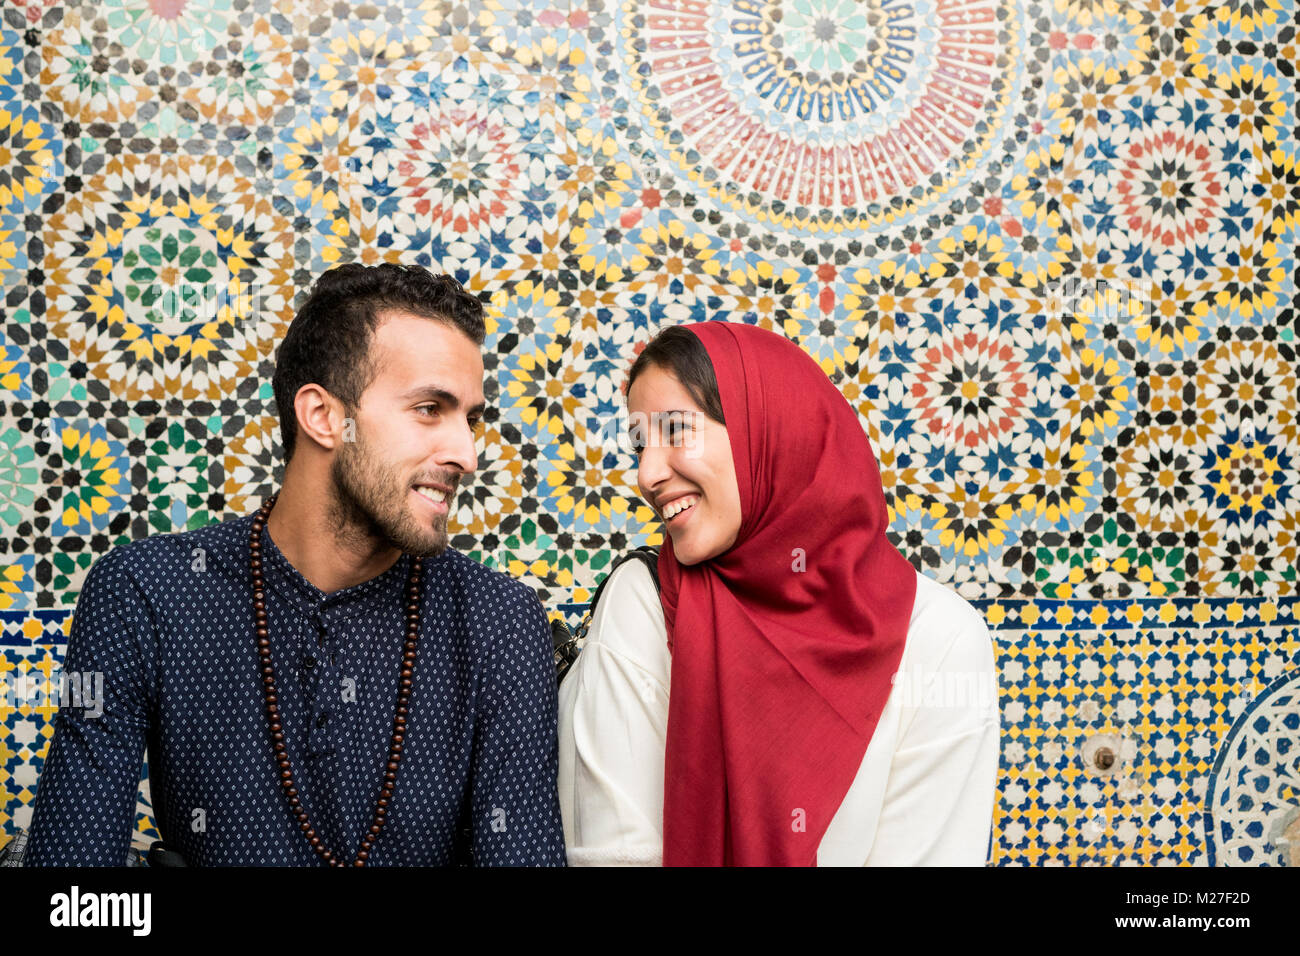 Muslim couple in relationship talking and smiling in front of arabesque oriental decoration Stock Photo